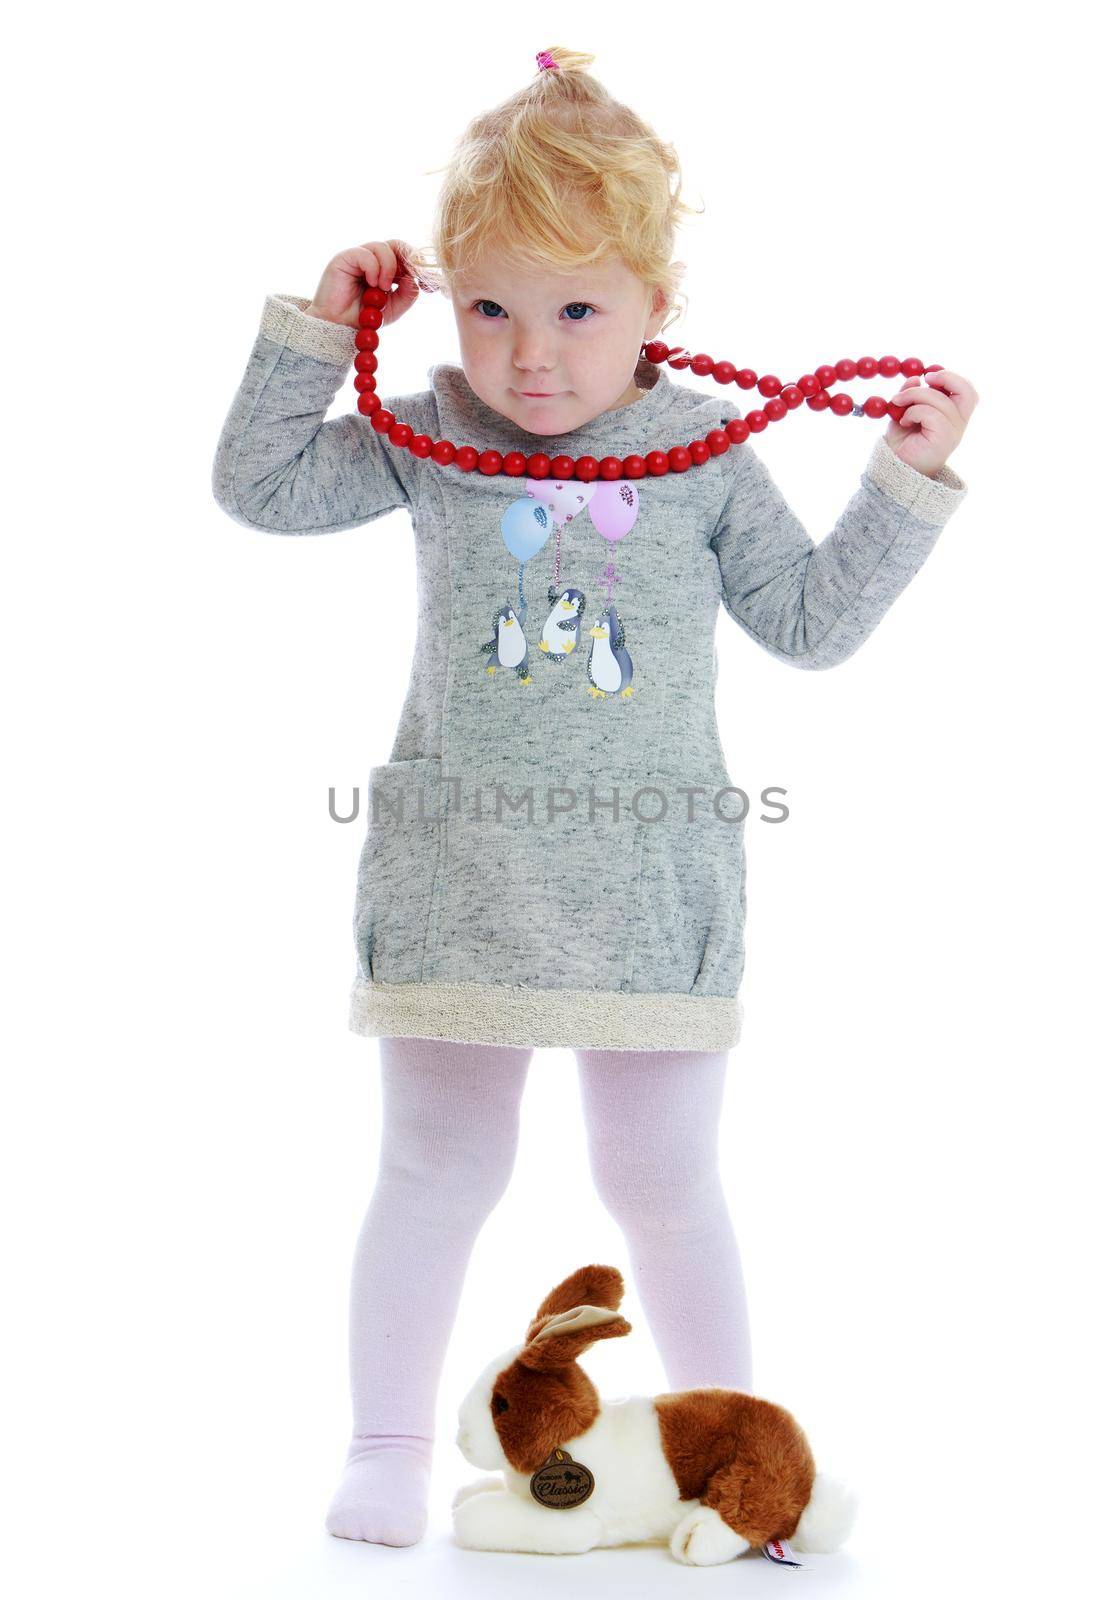 little girl.Two-year-old girl with beads.Isolated on white background.